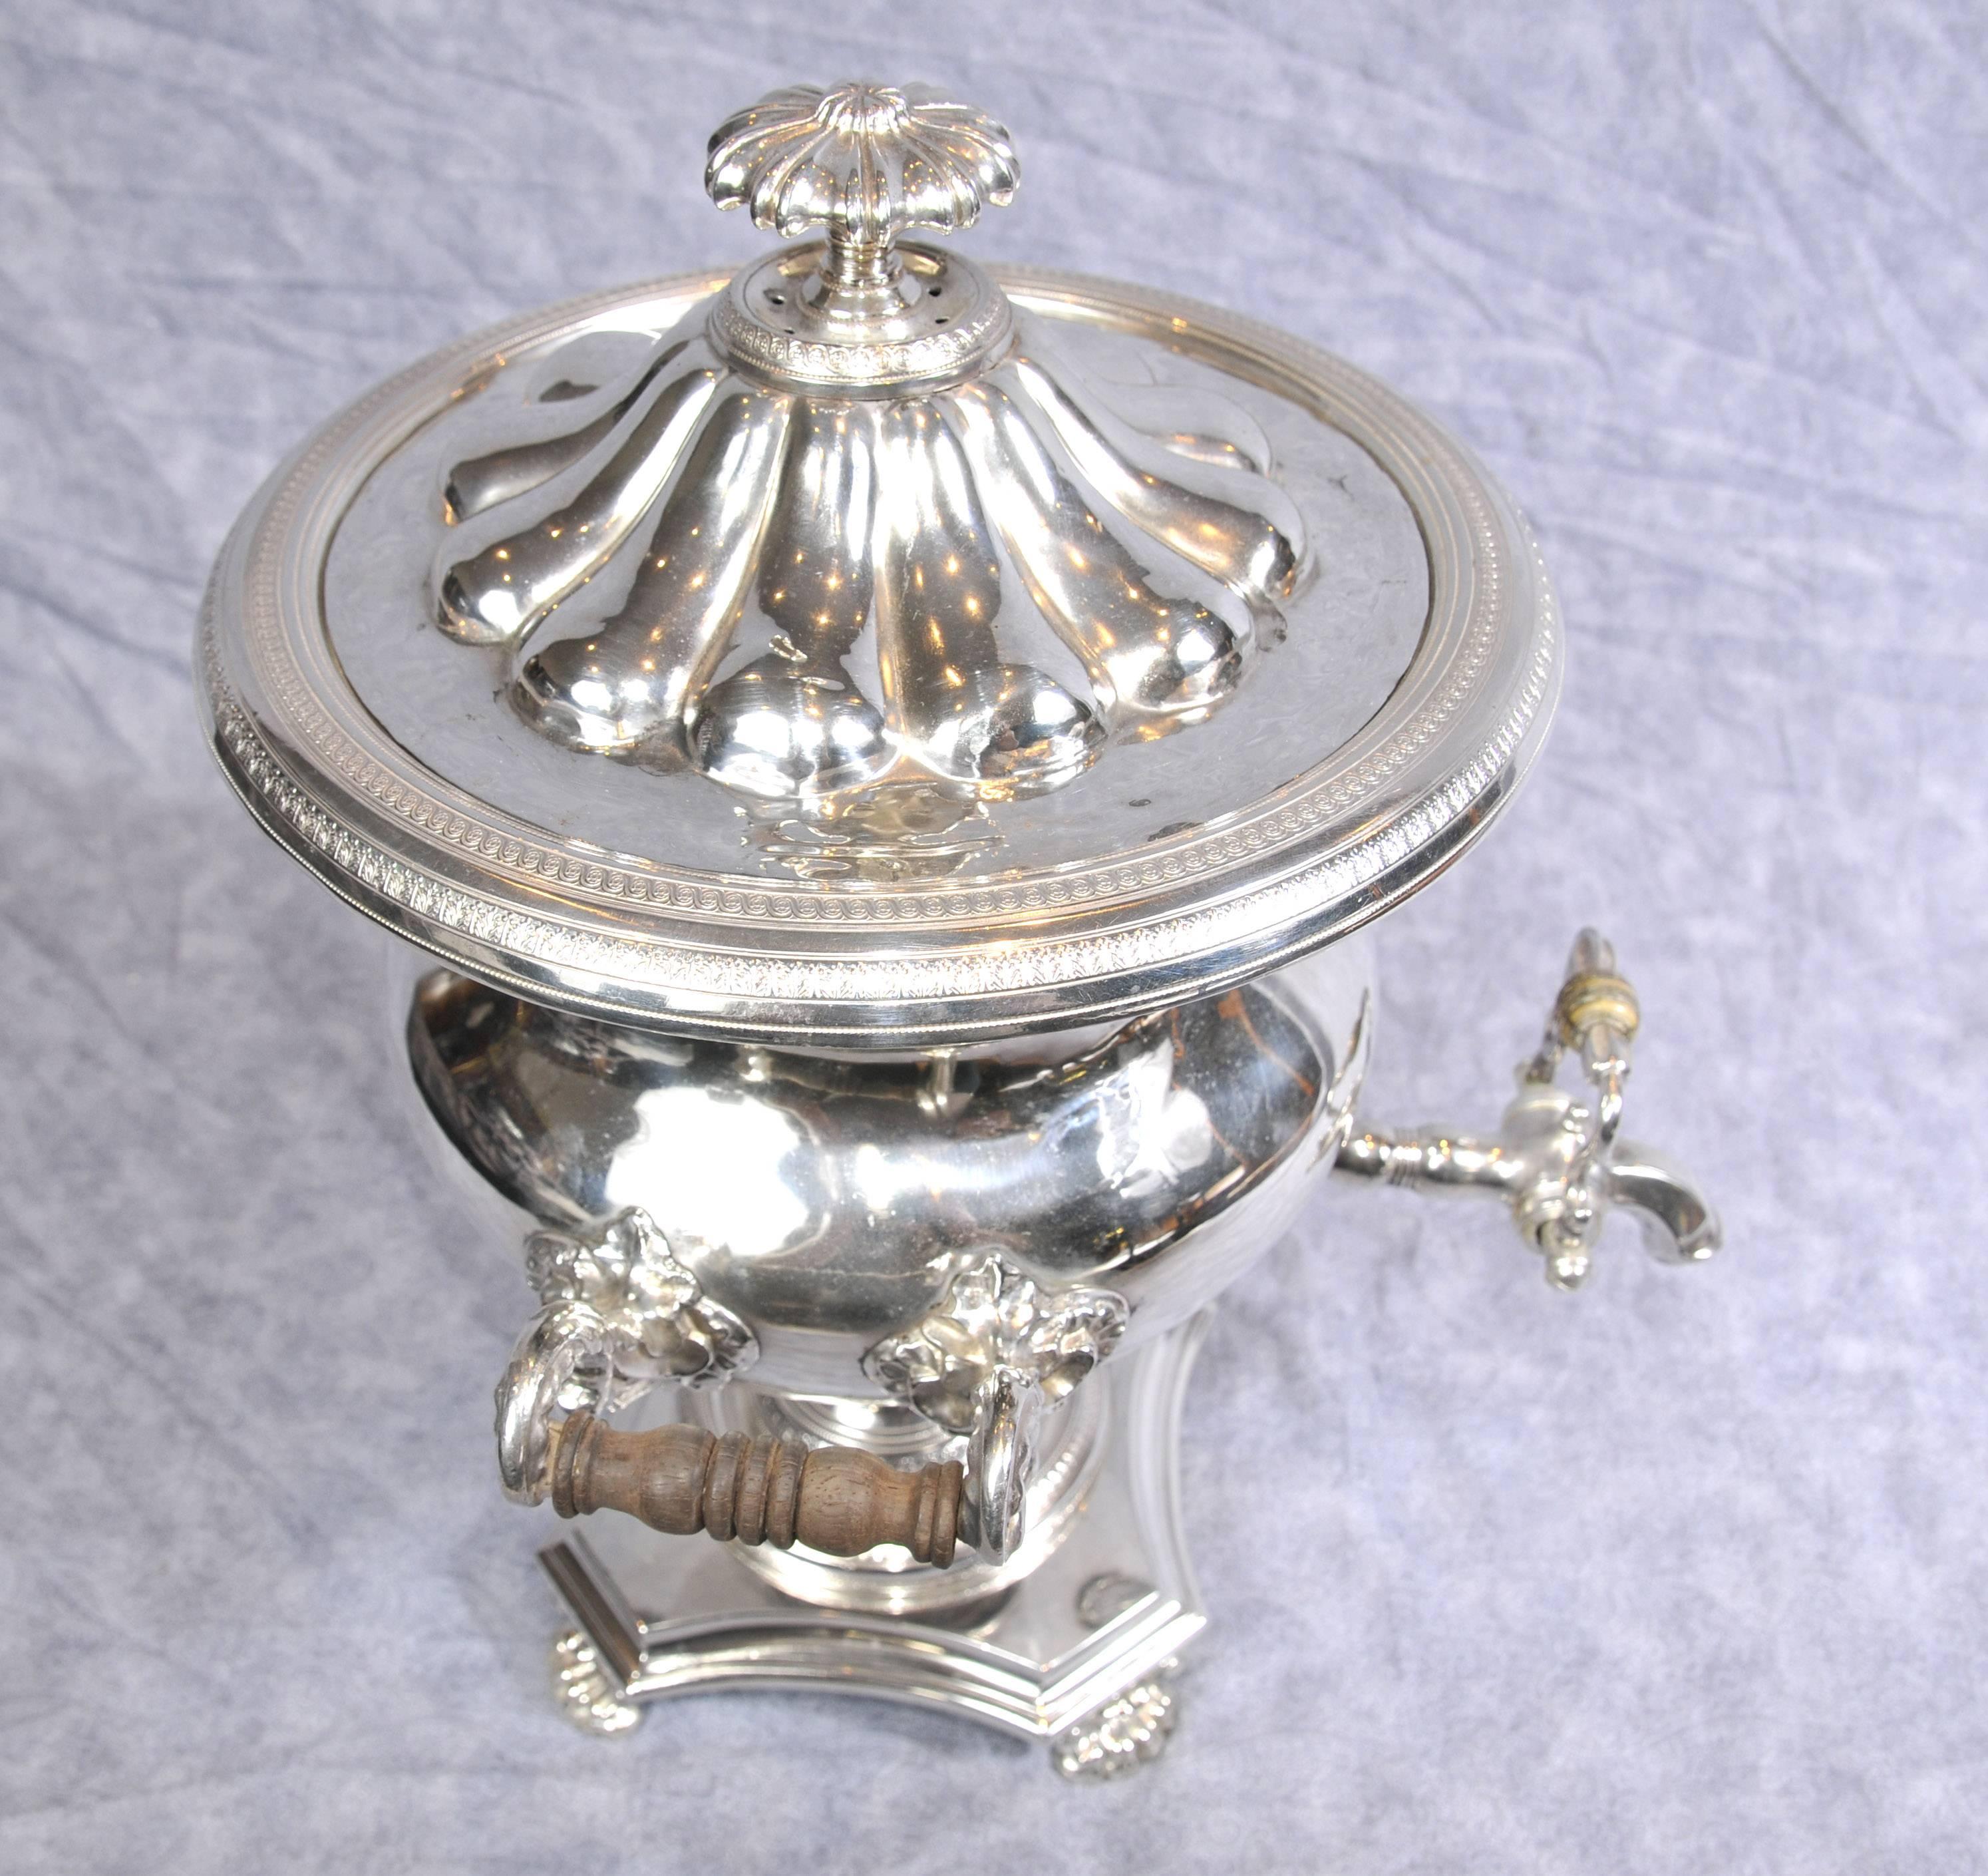 Antique English Silver Plate Samovar Tea Coffee Urn Sheffield Silver Plate In Good Condition For Sale In Potters Bar, Herts